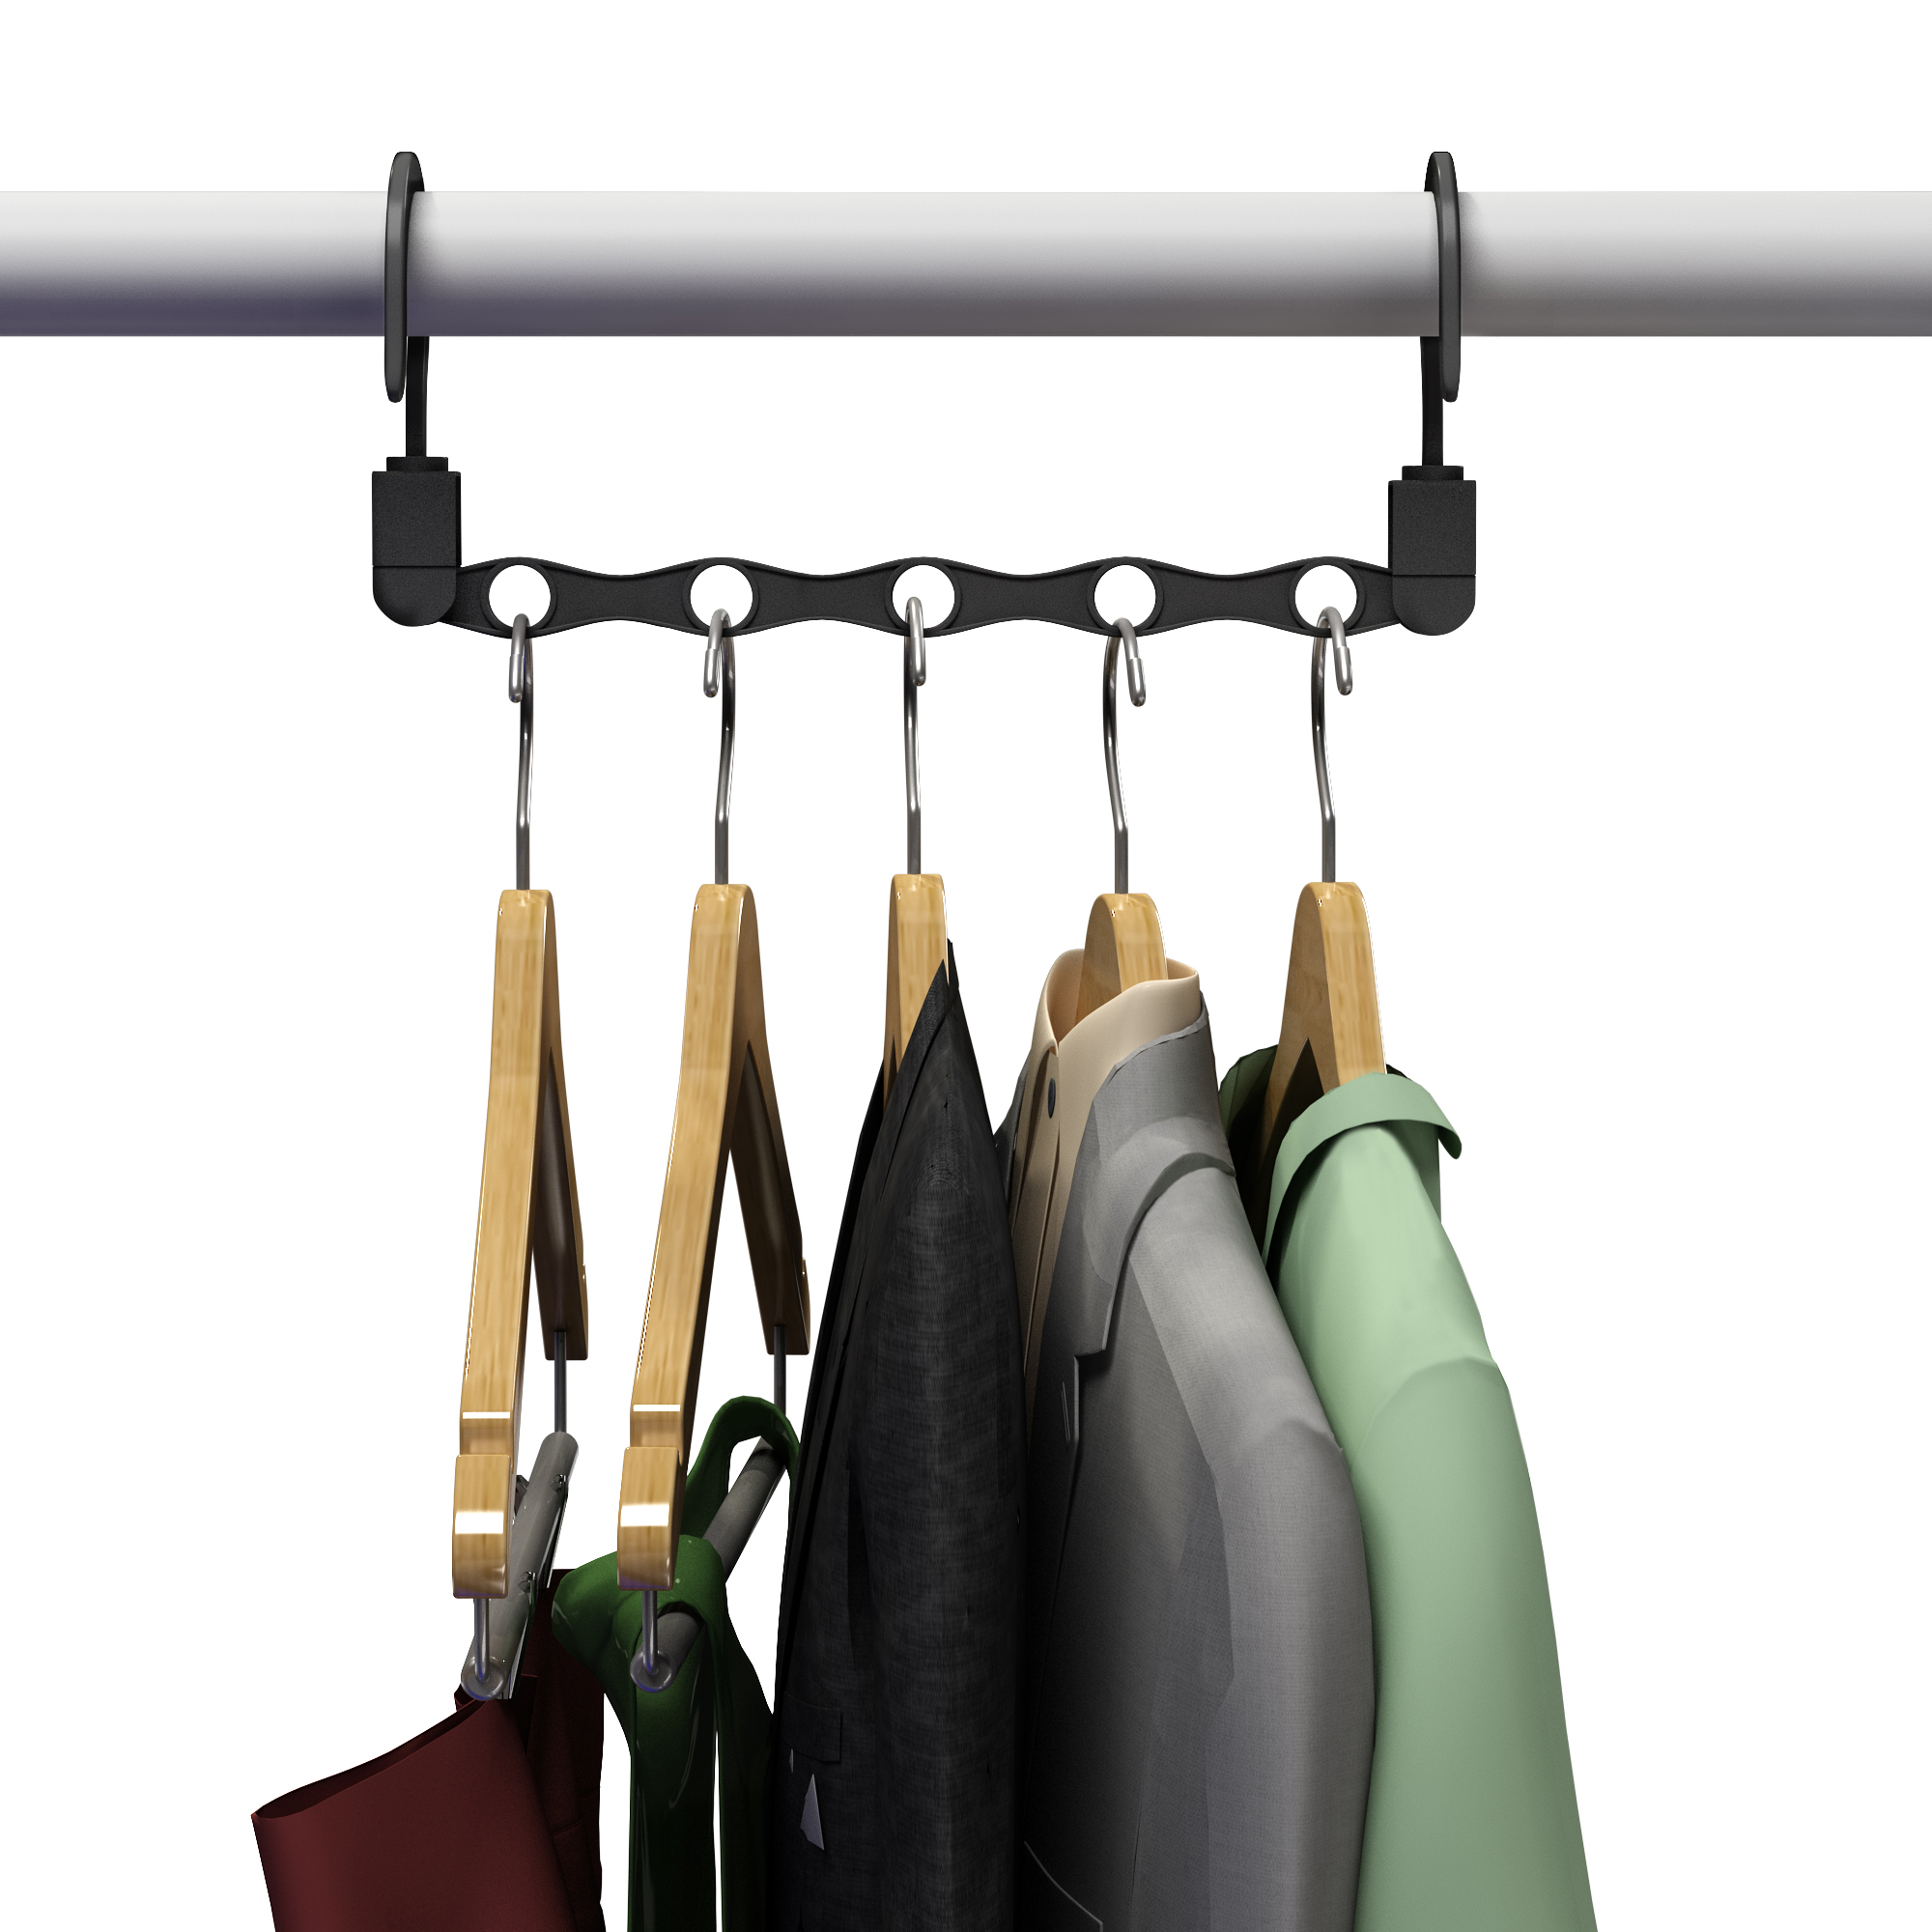 Space Saving Closet Organization Vertical and Horizontal Multi Hanger for Shirts, Pants, and Coats, All Your Dorm Room Essentials by Everyday Home - image 1 of 6